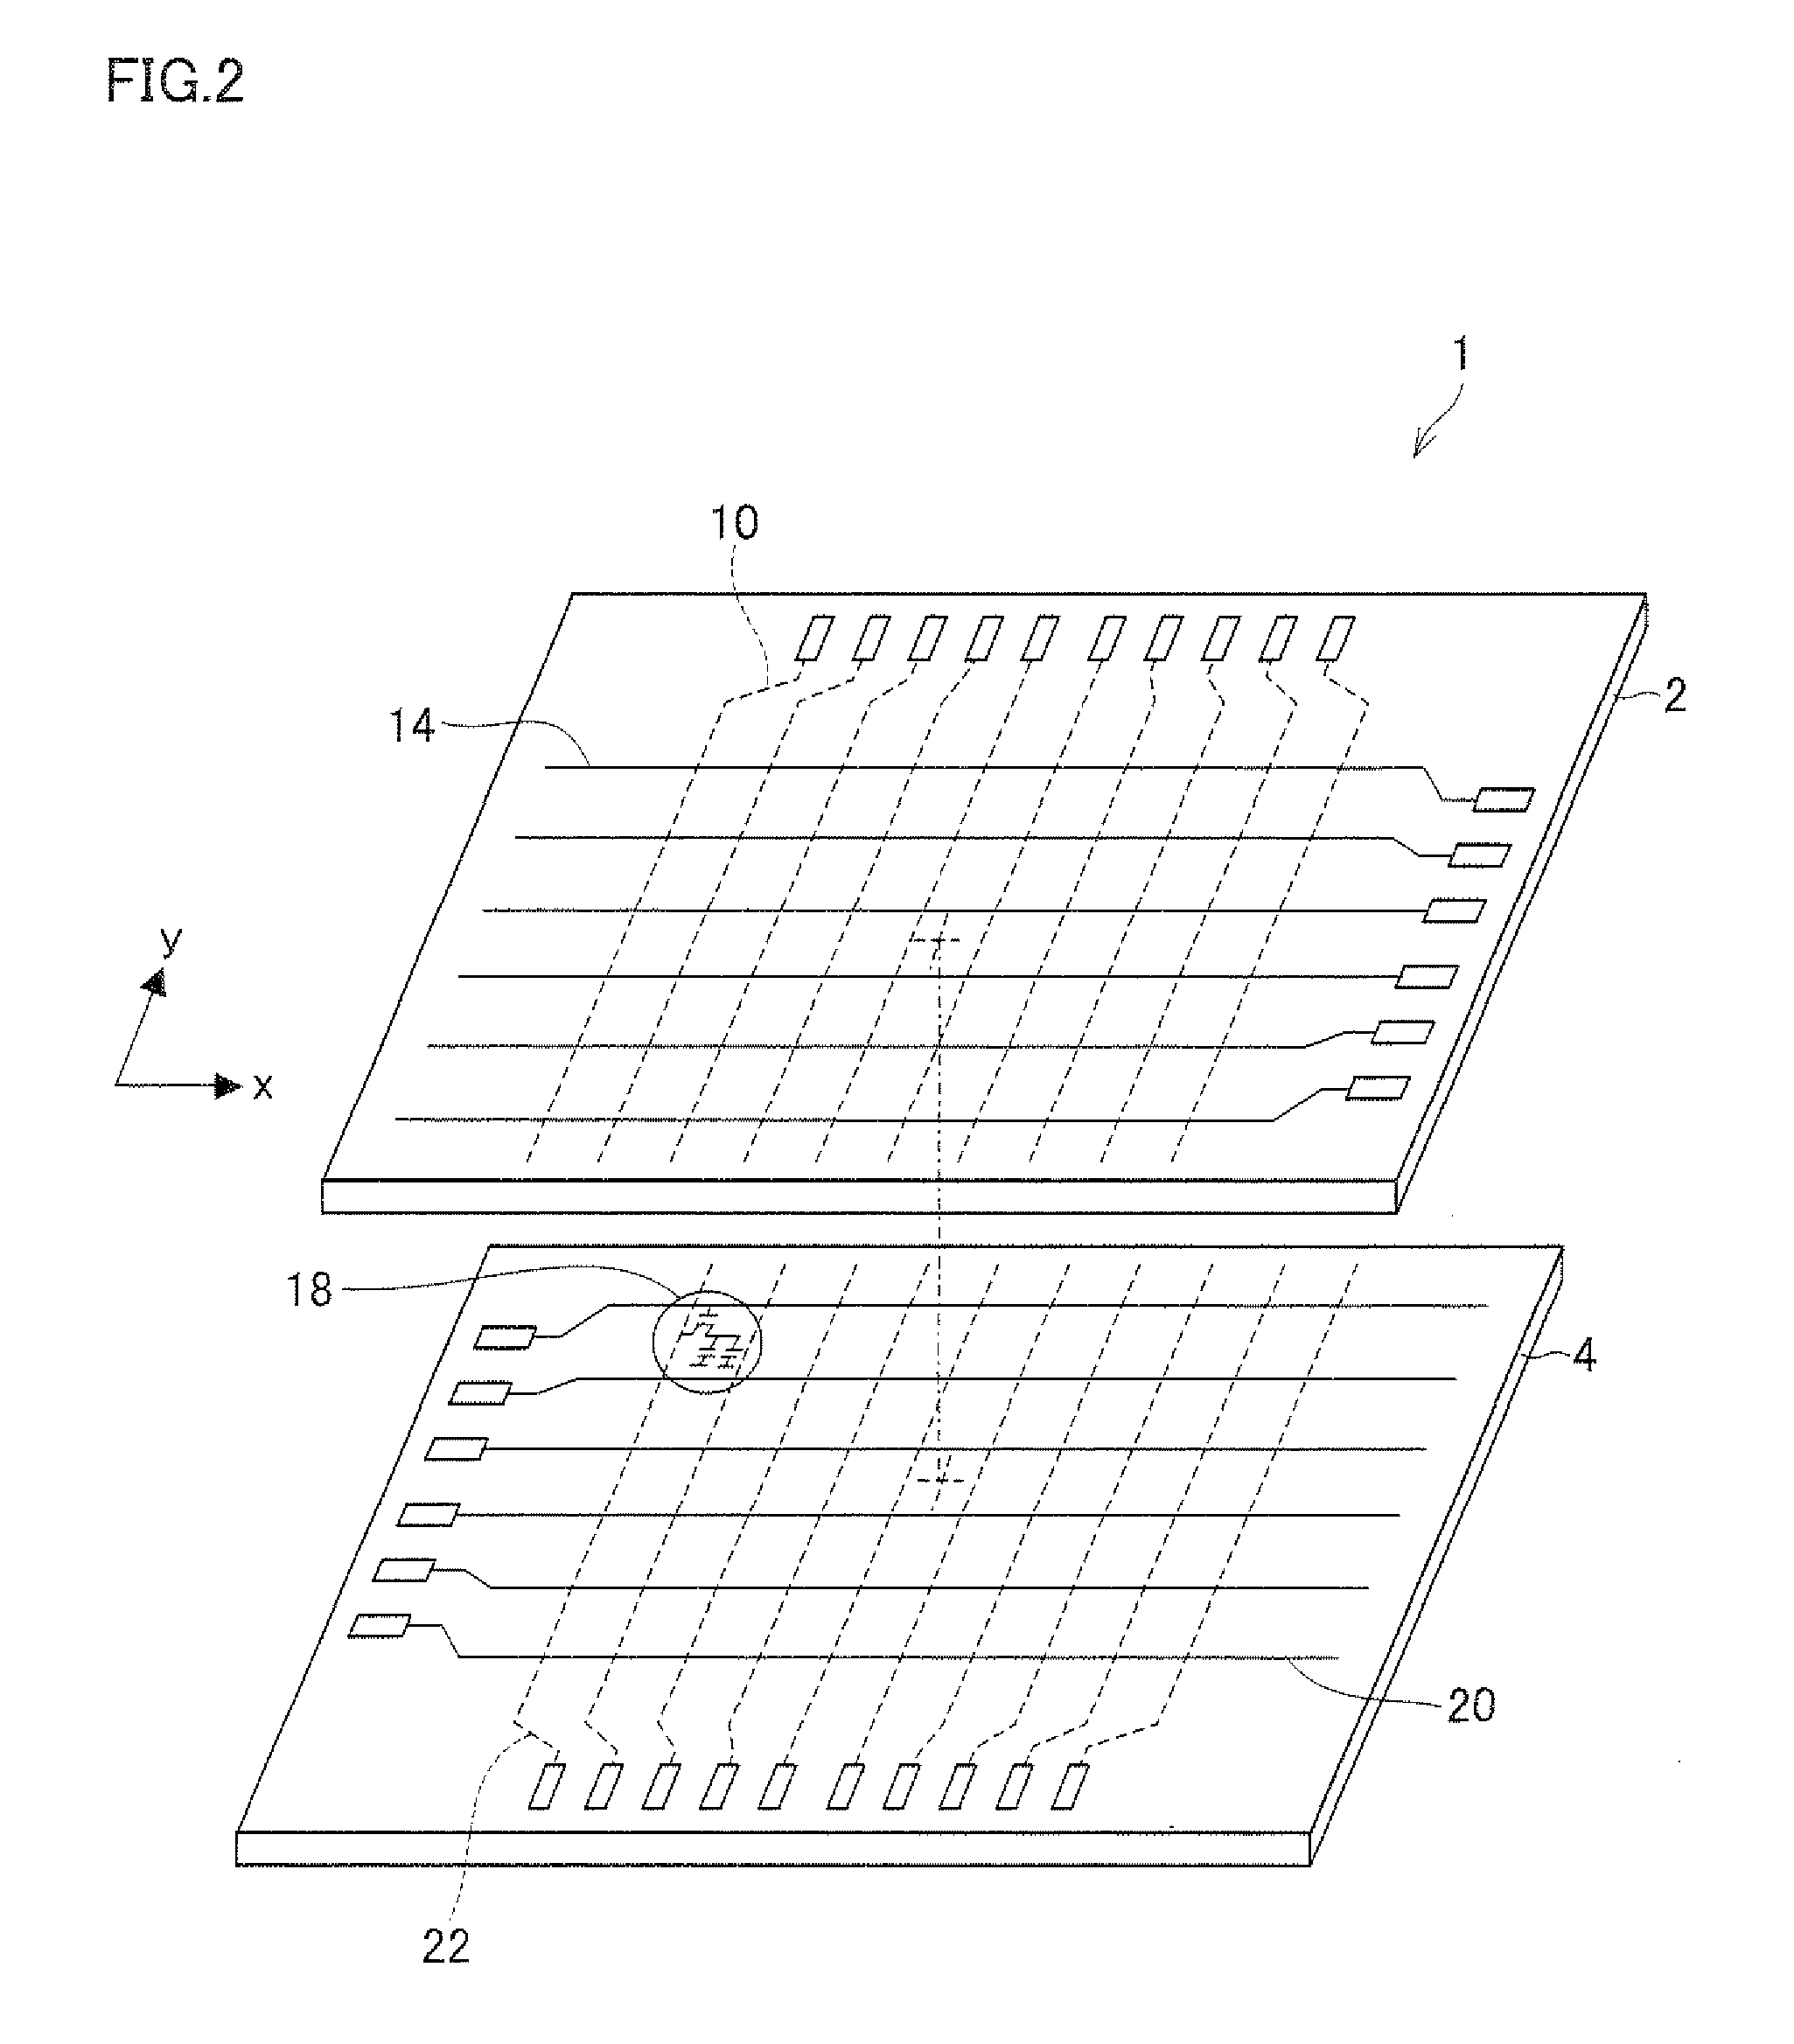 Display panel substrate, display panel, display appratus, and method for manufacturing display panel substrate